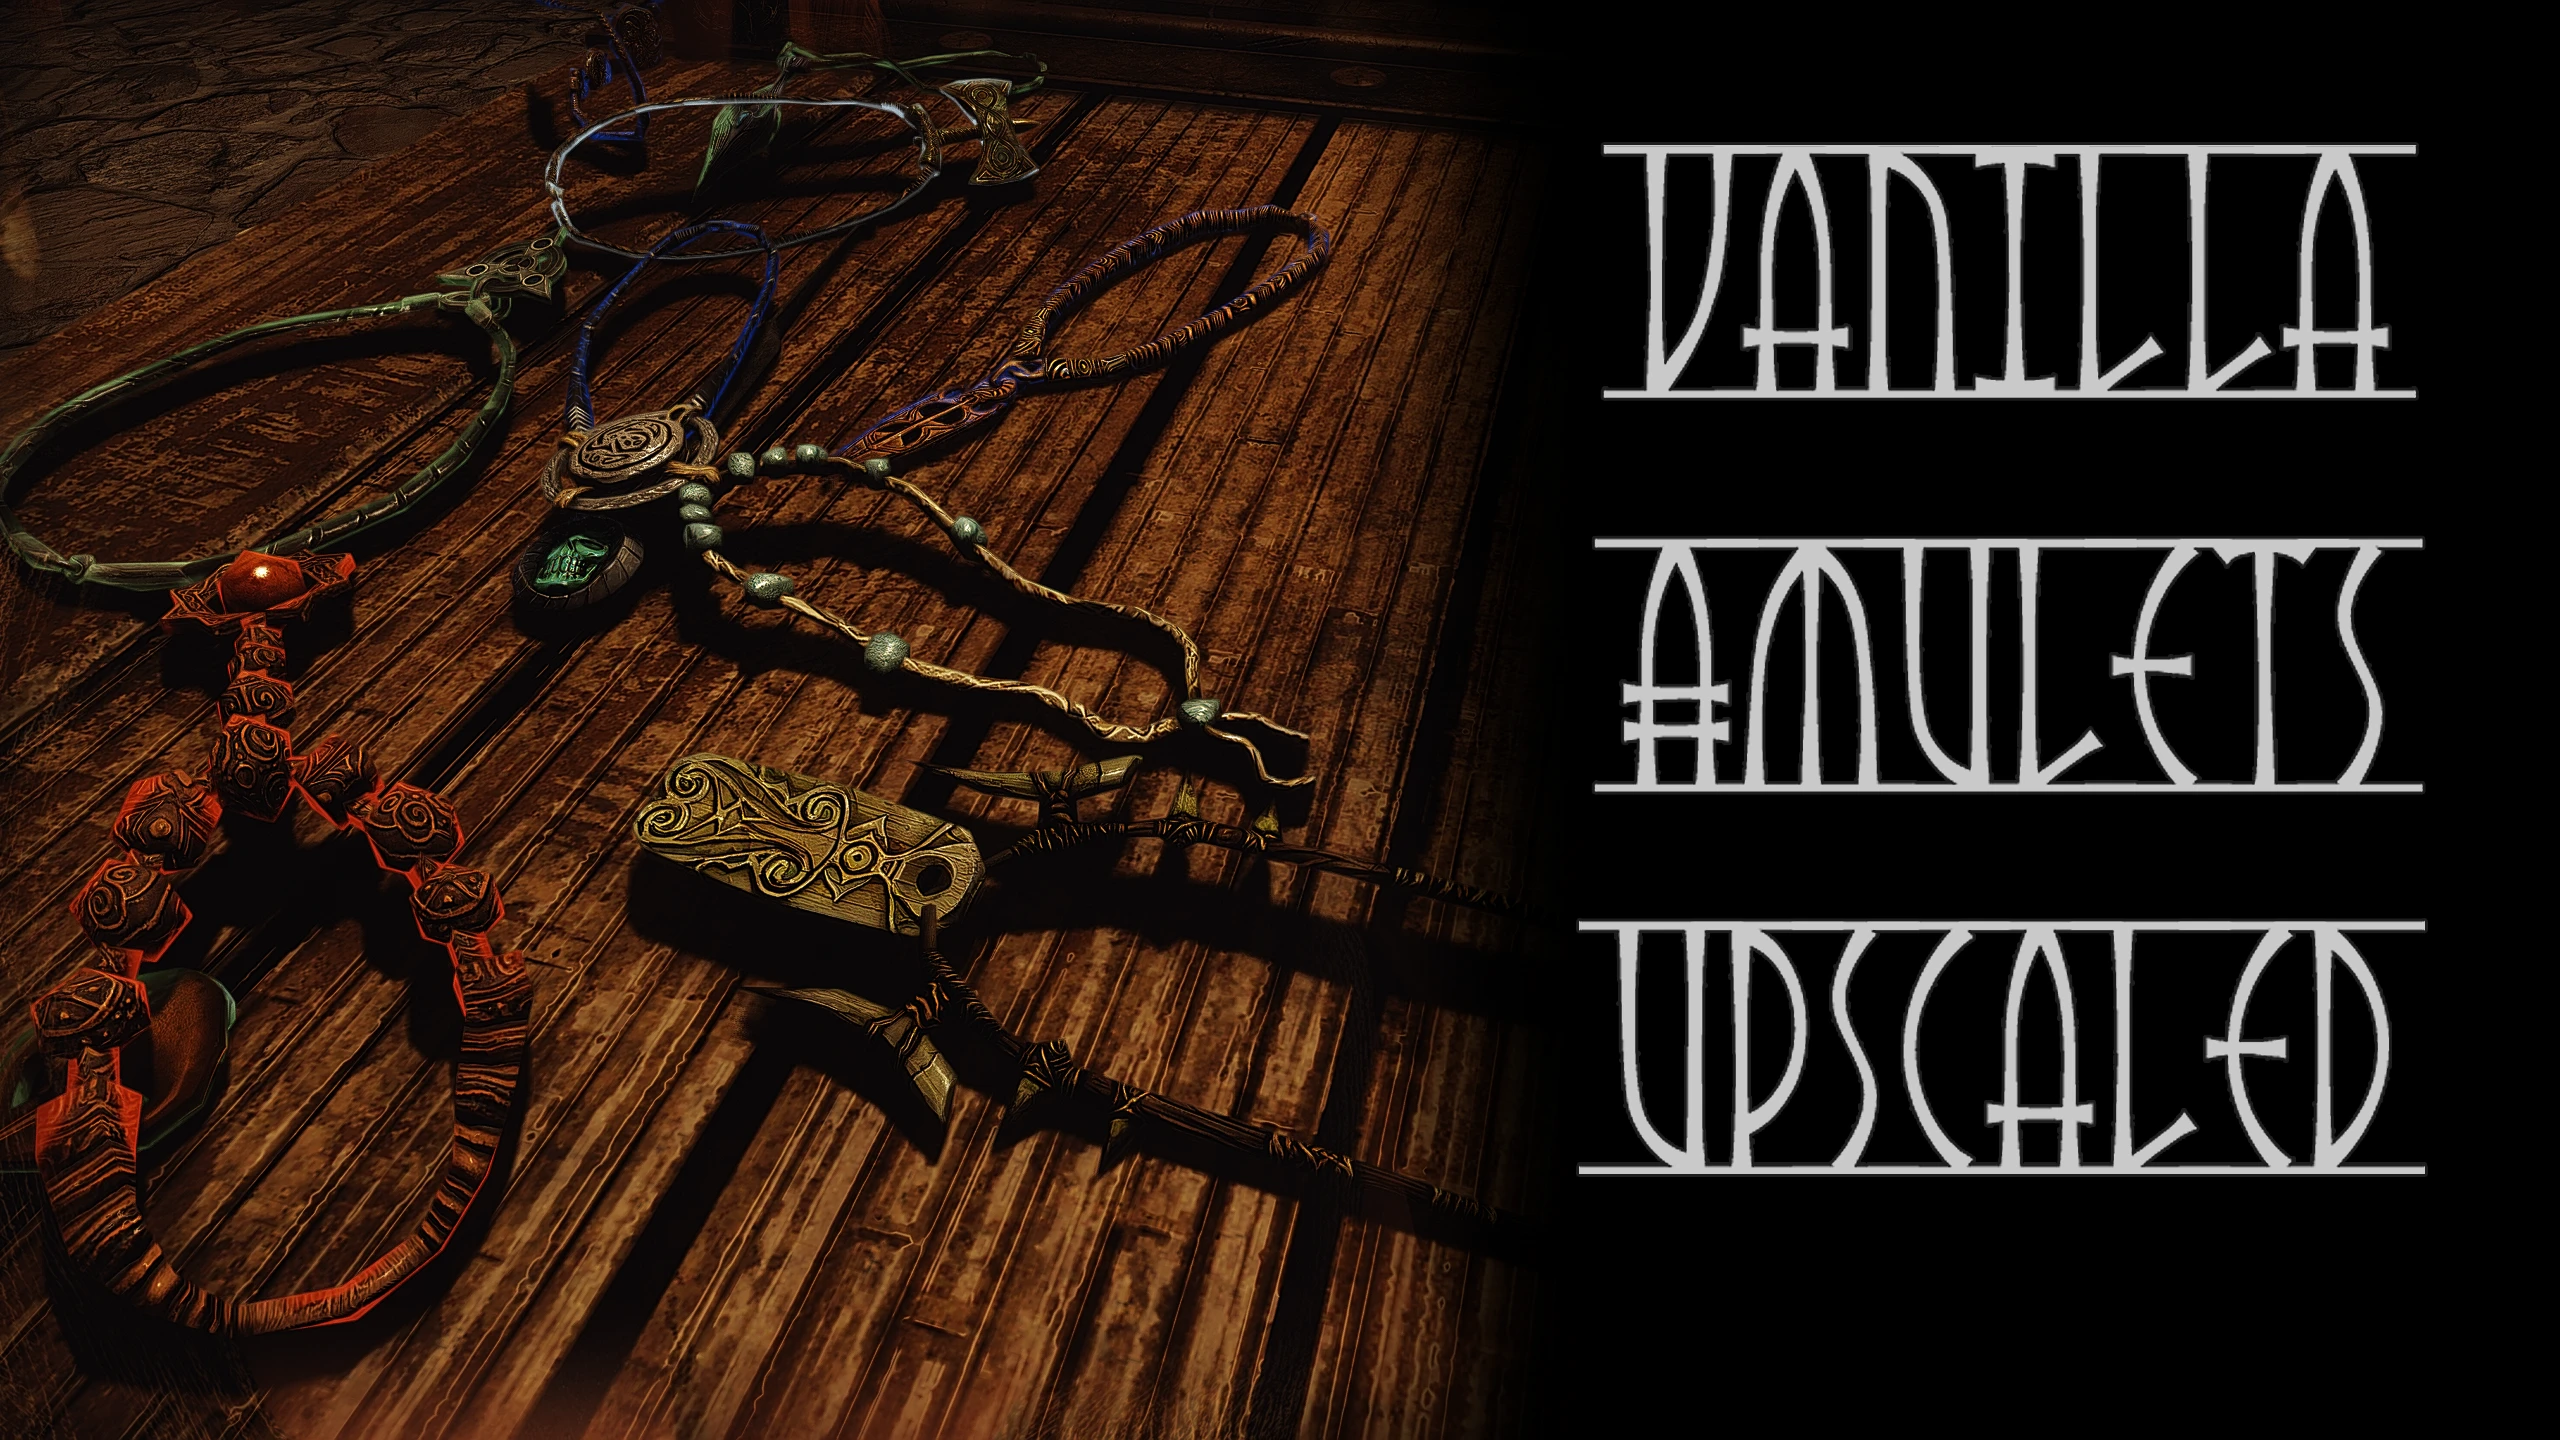 HD Амулеты / Vanilla Amulet textures Upscaled and added Env maps